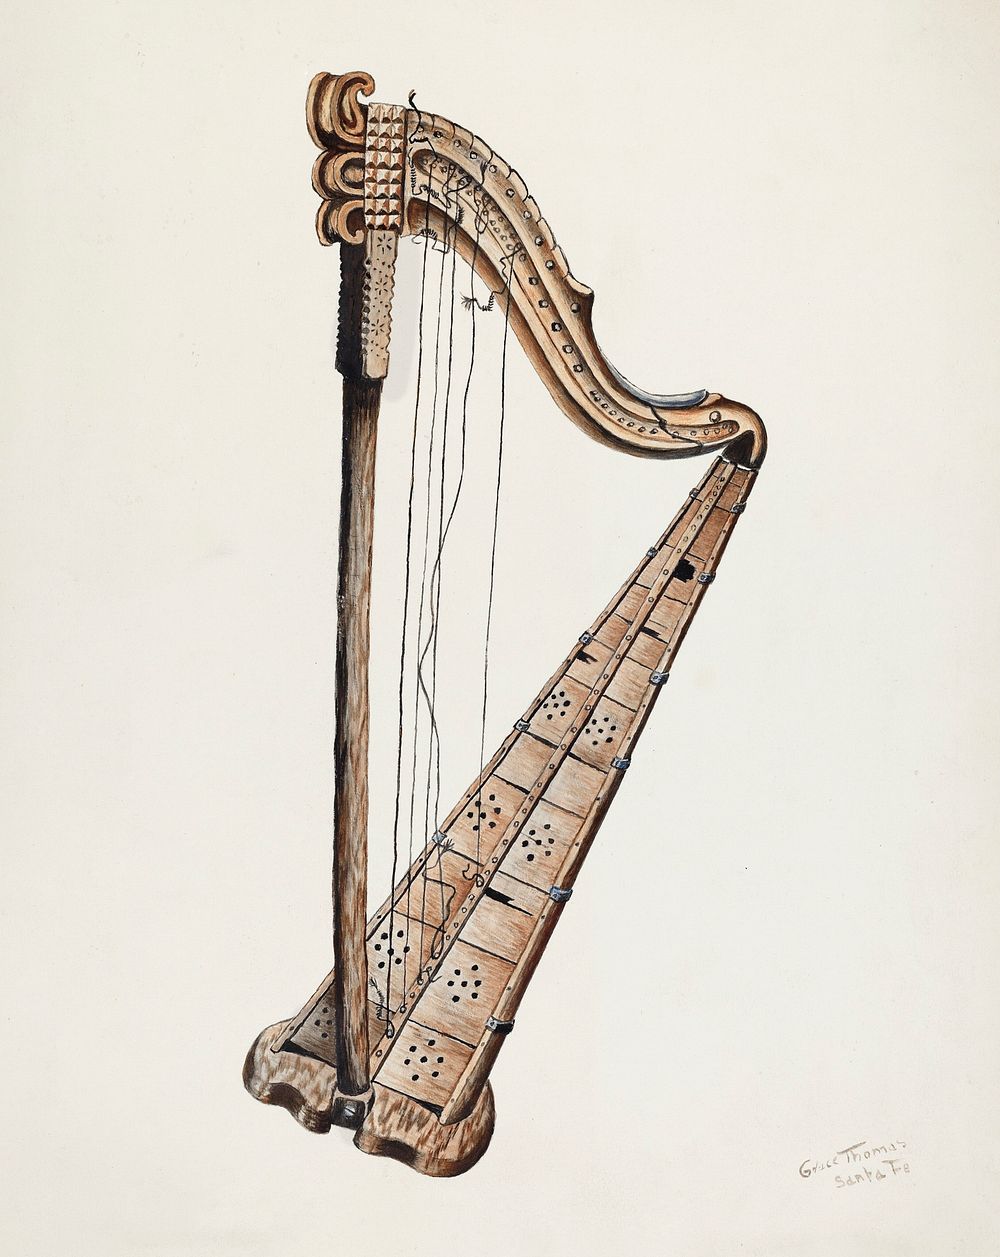 Stringed Harp (ca.1939) by Grace Thomas. Original from The National Gallery of Art. Digitally enhanced by rawpixel.